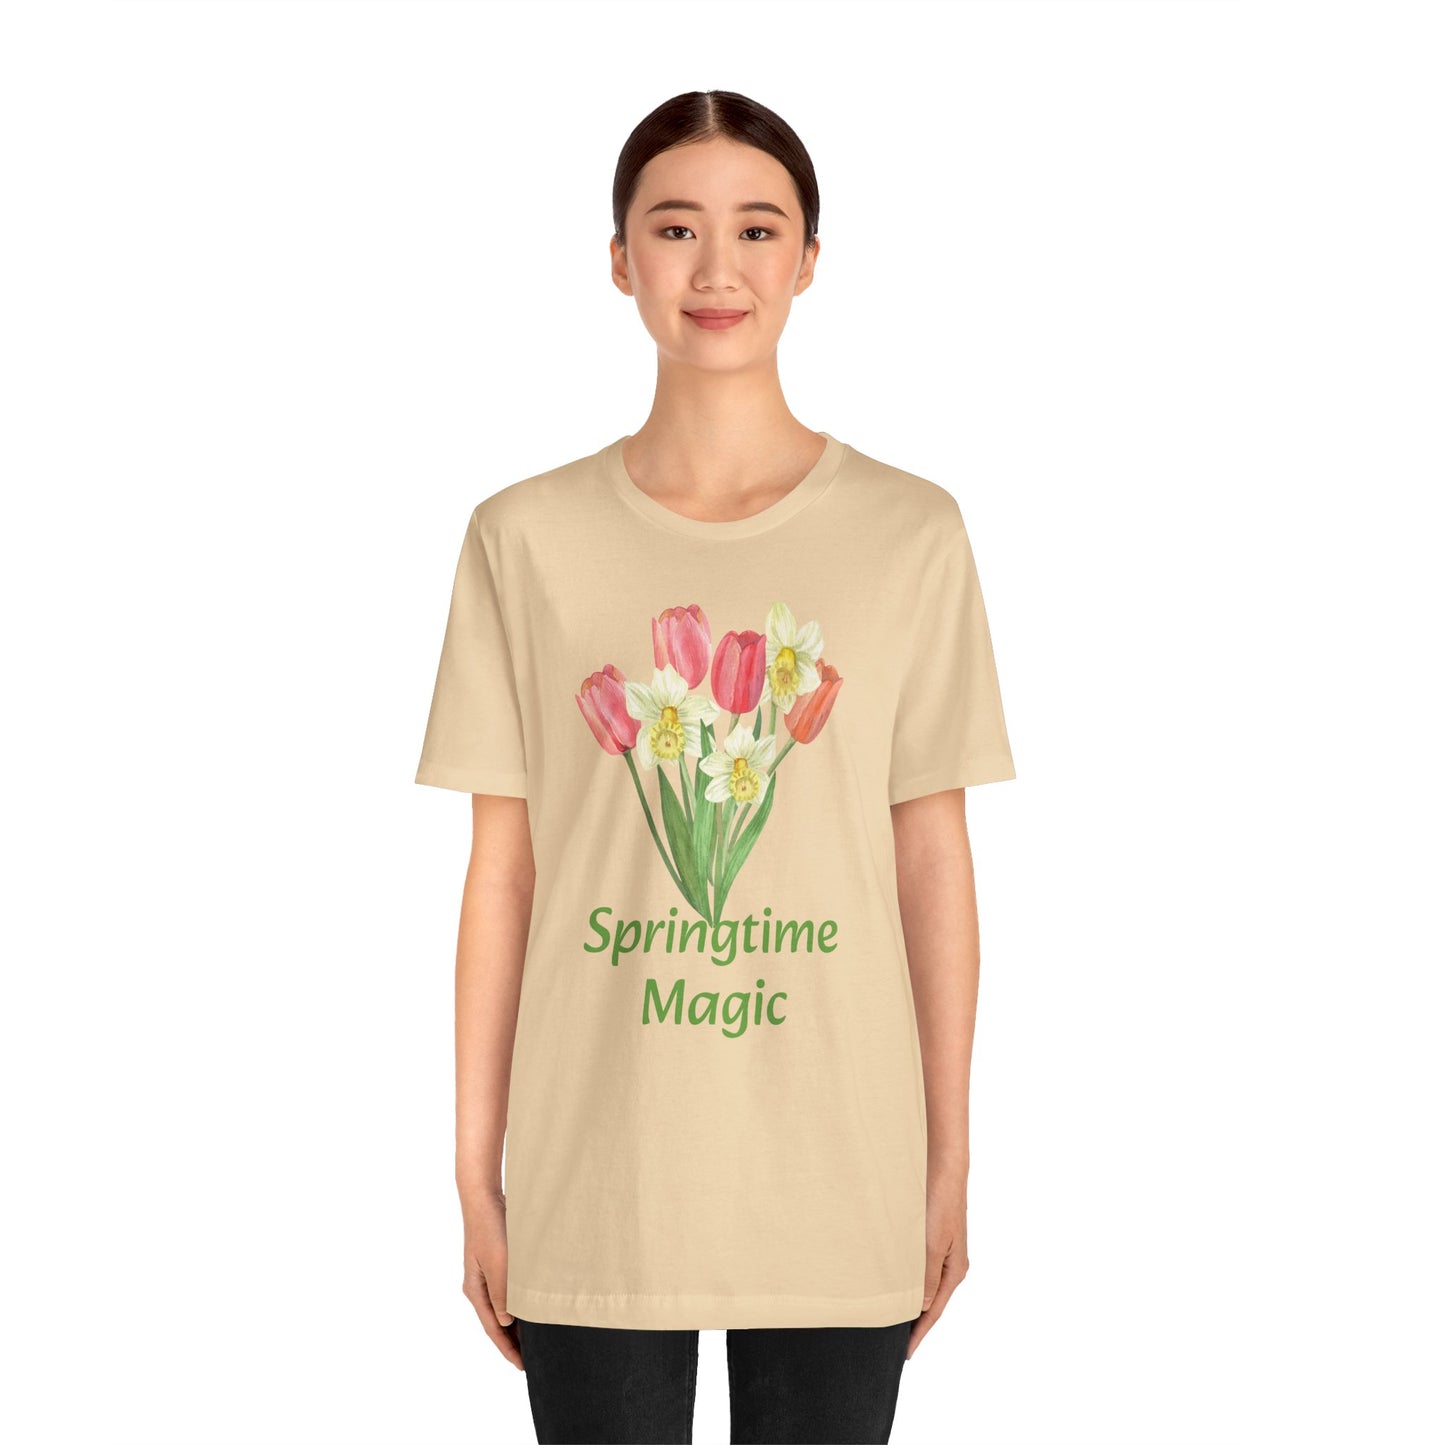 Woman wearing a beige Unisex Springtime-Magic T-shirt with tulip print and the text "springtime magic" by Bella + Canvas, Printify.